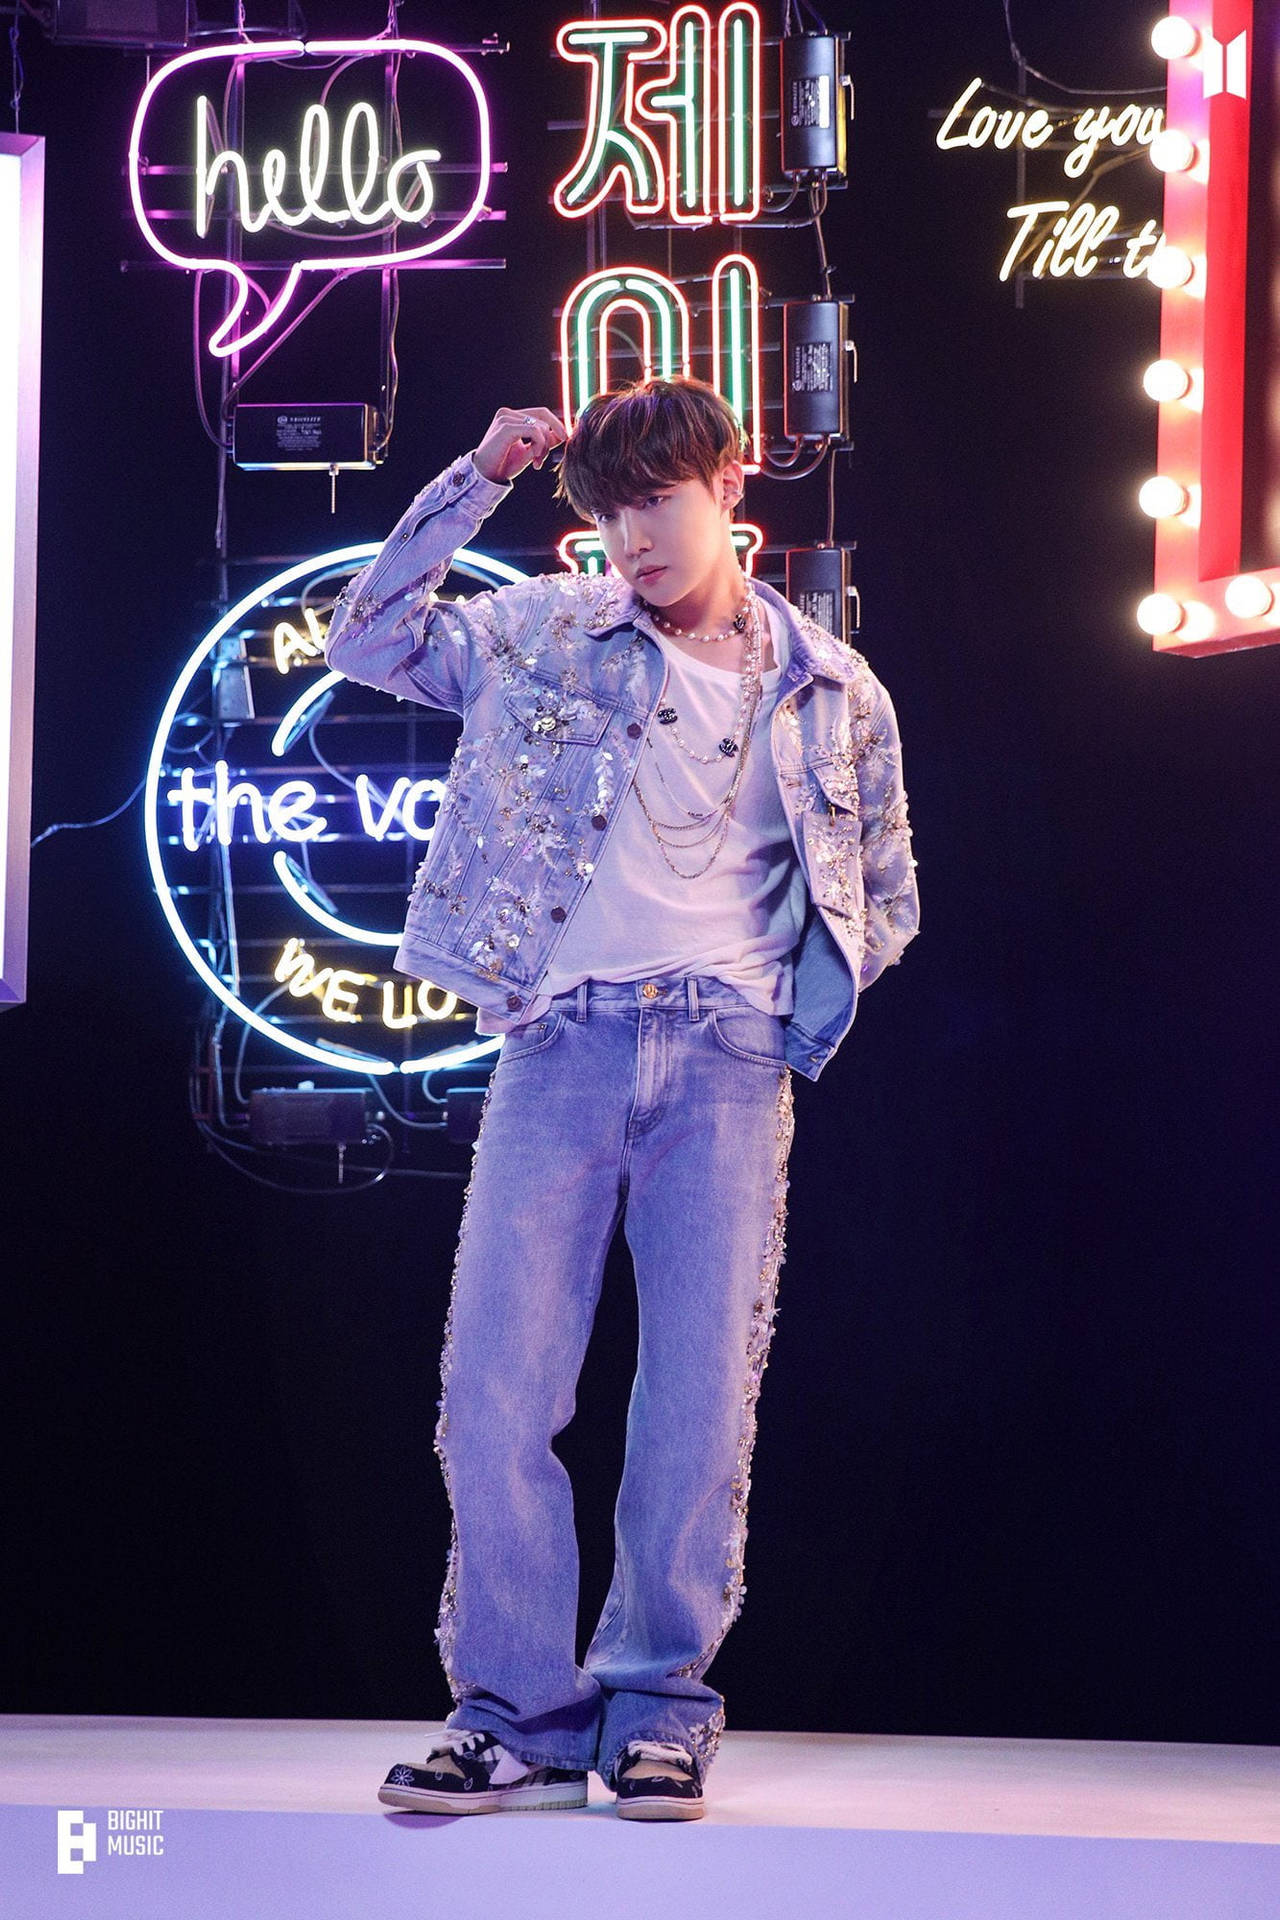 Jhope Cute With Neon Signages Background